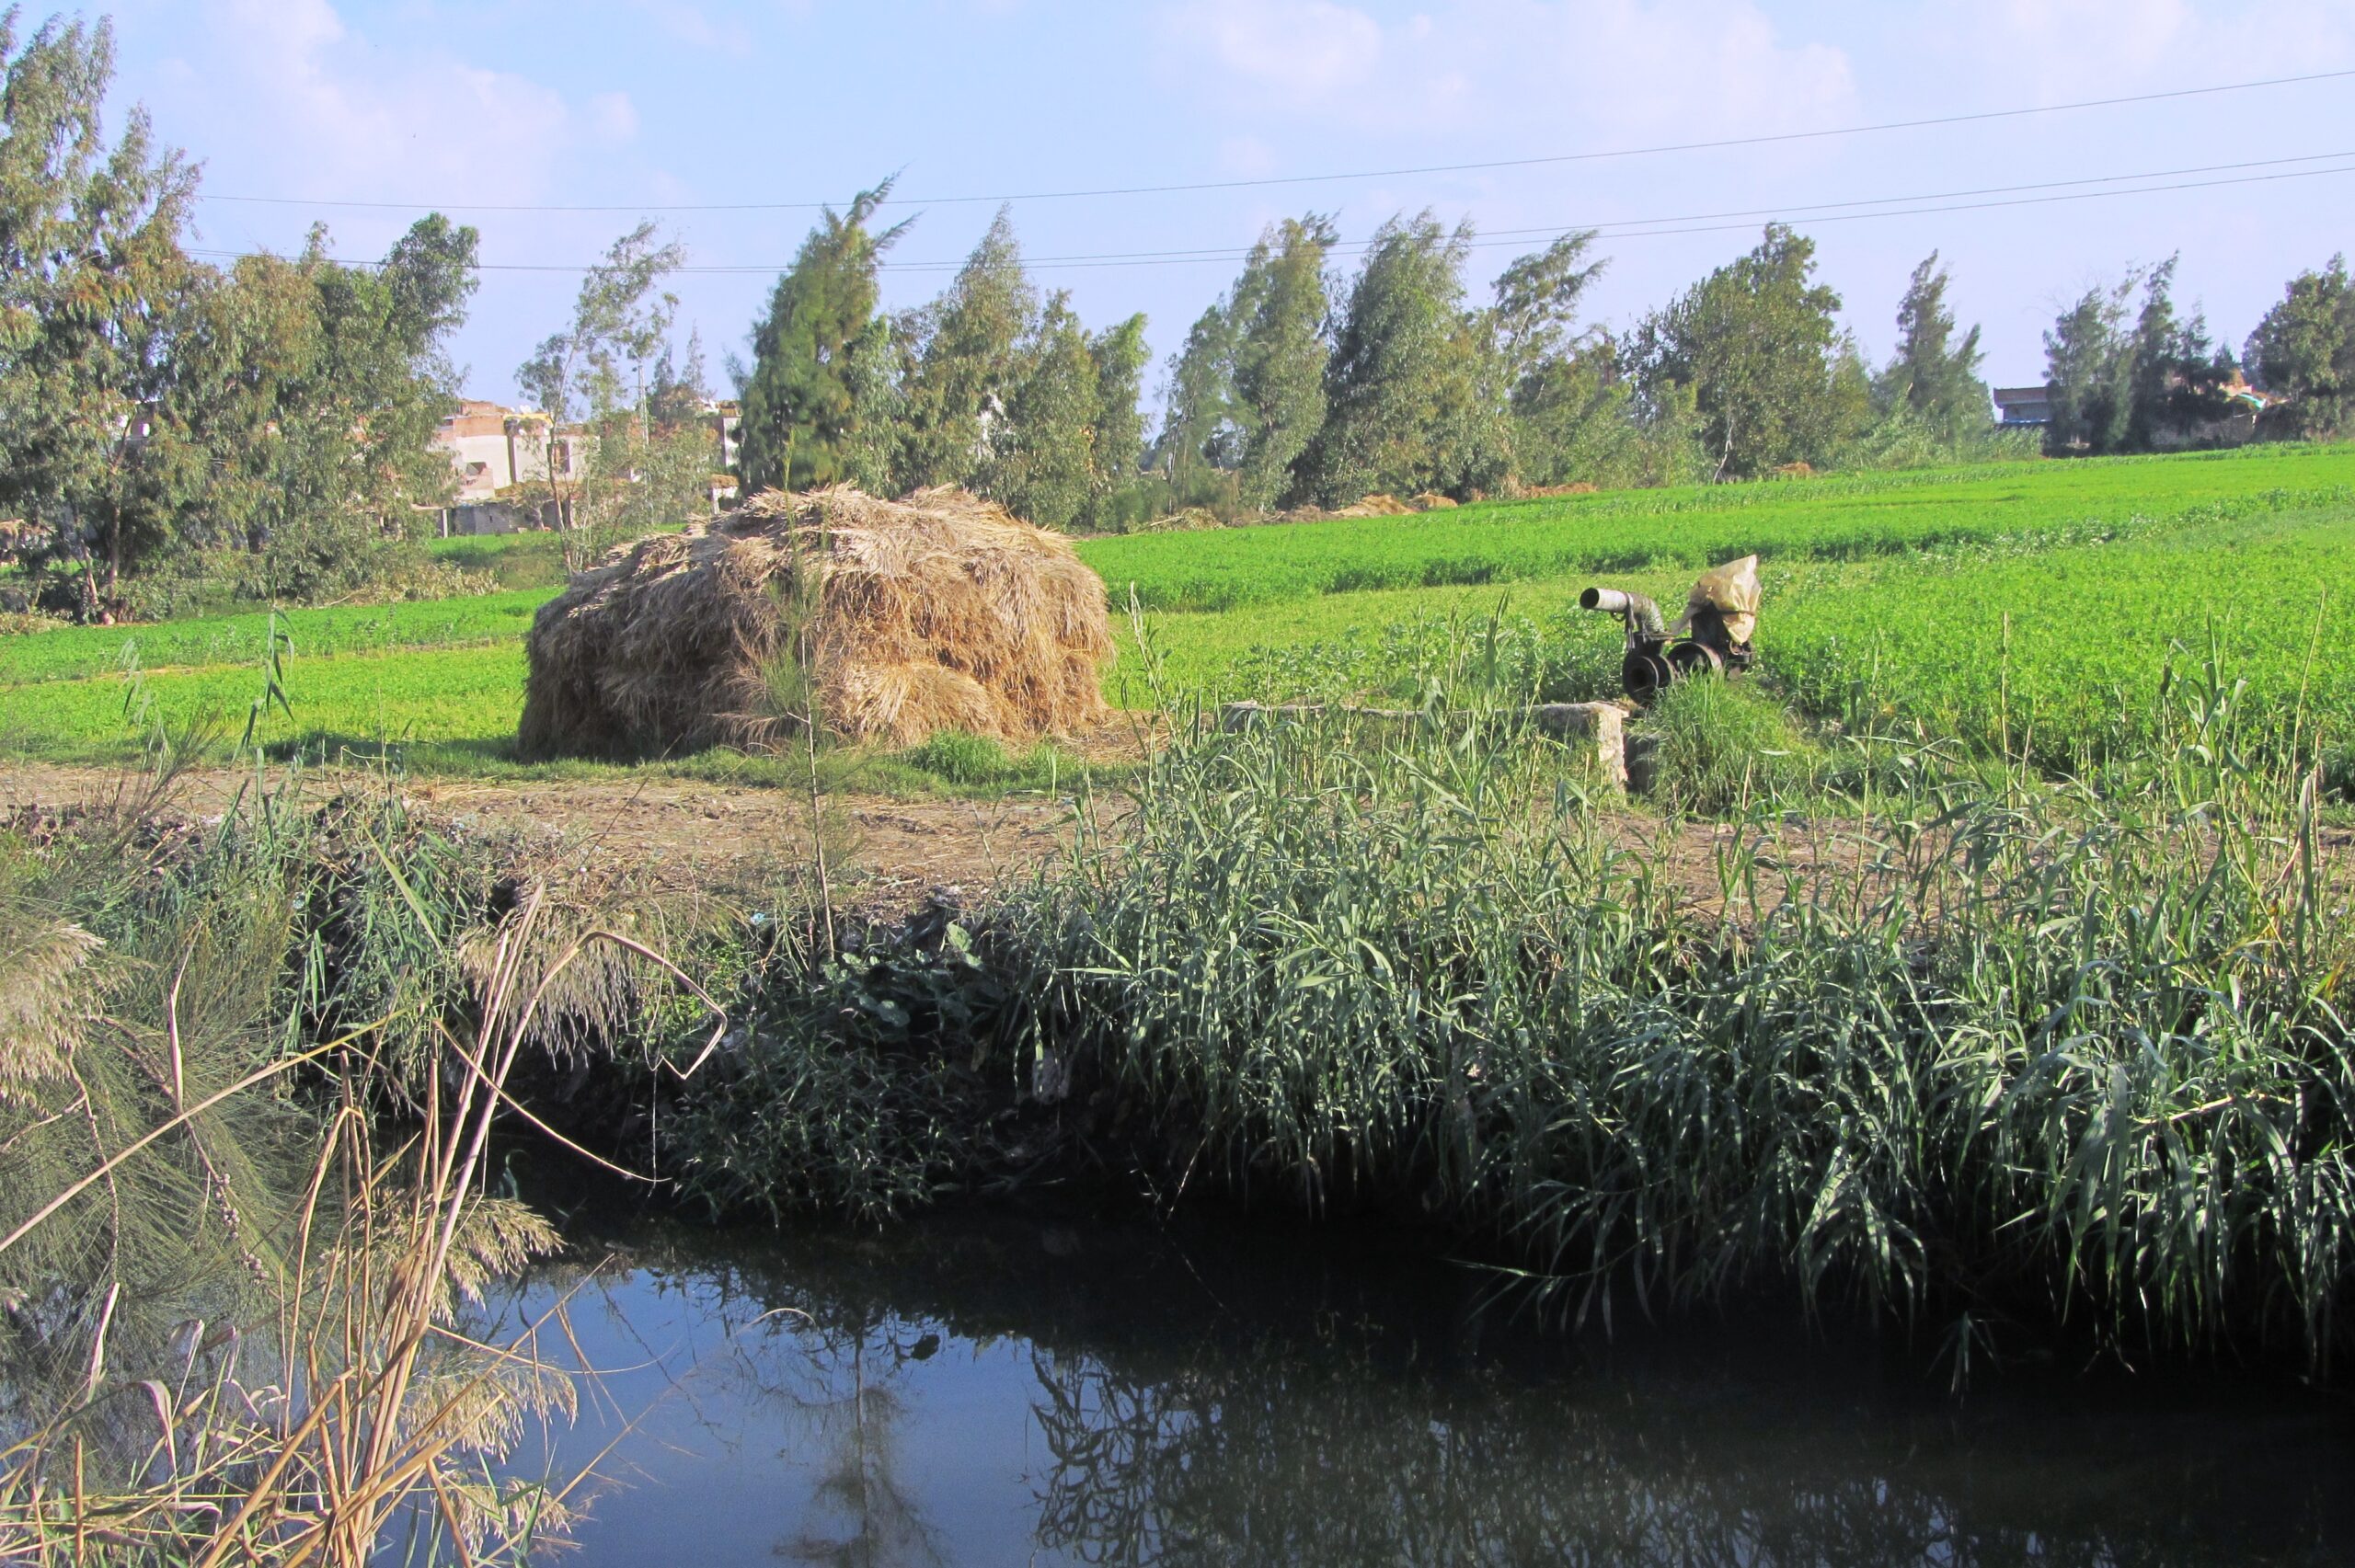 Secondary feeder canal with irrigated berseem field in the Nile Delta